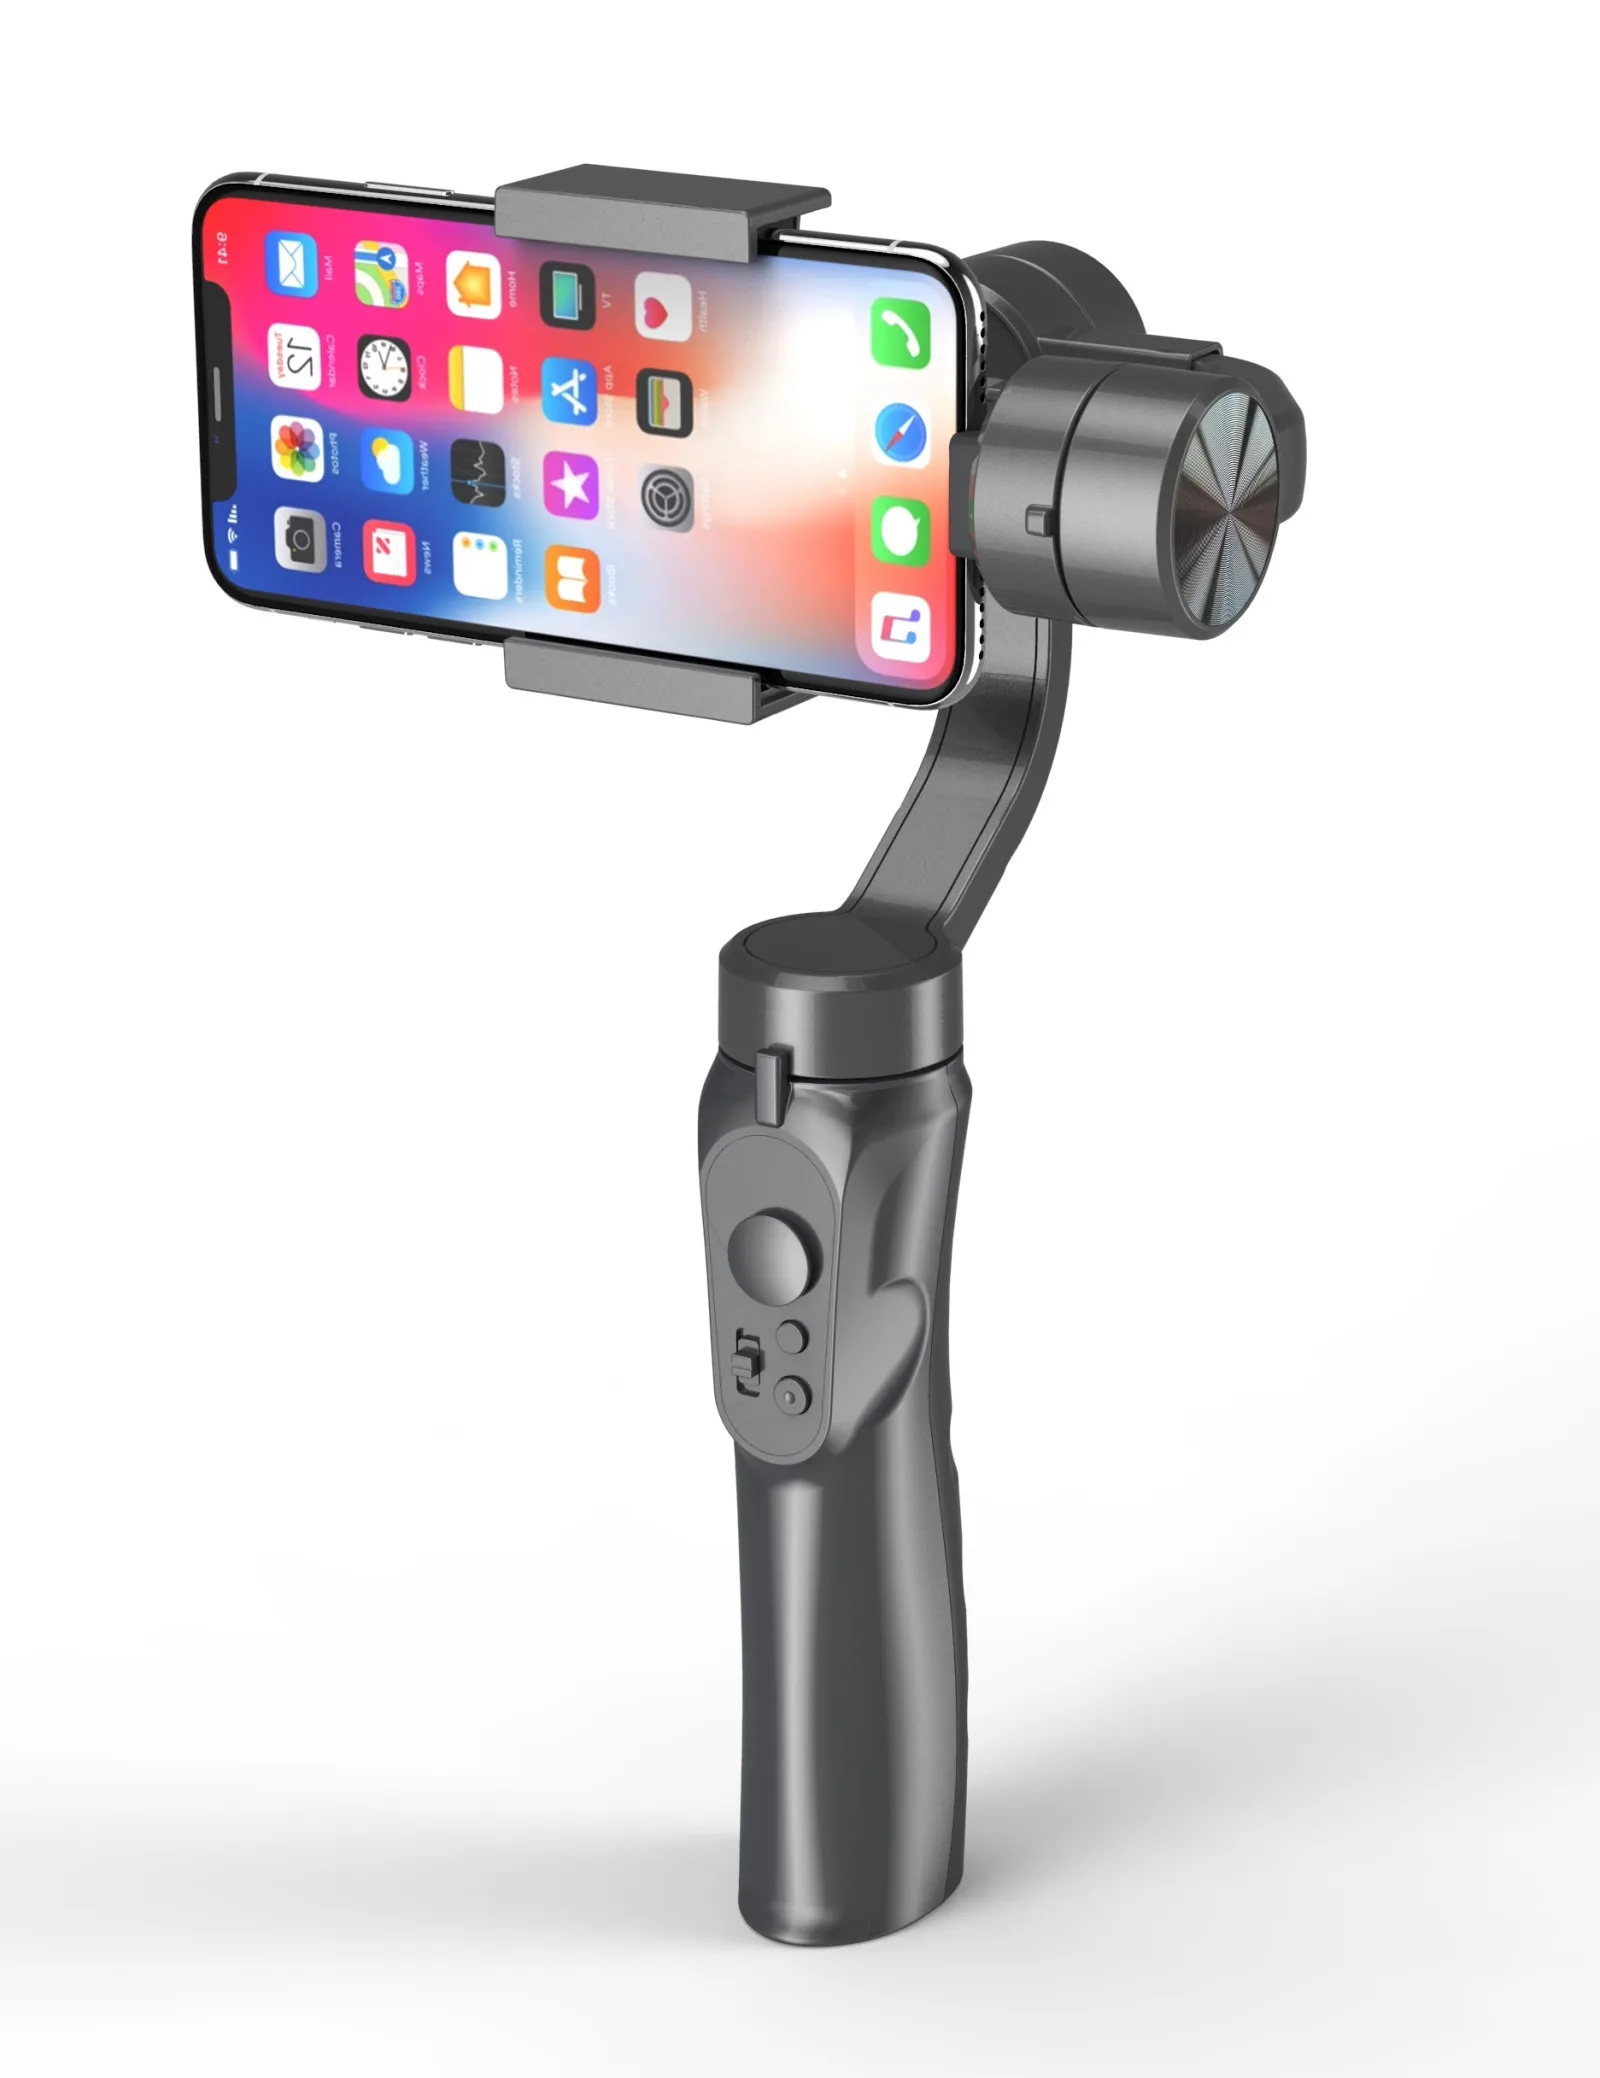 

Portable phone accessories Dslr Camera Smart Phone Holder Video Stabilizer 3 Axis Handheld Gimbal